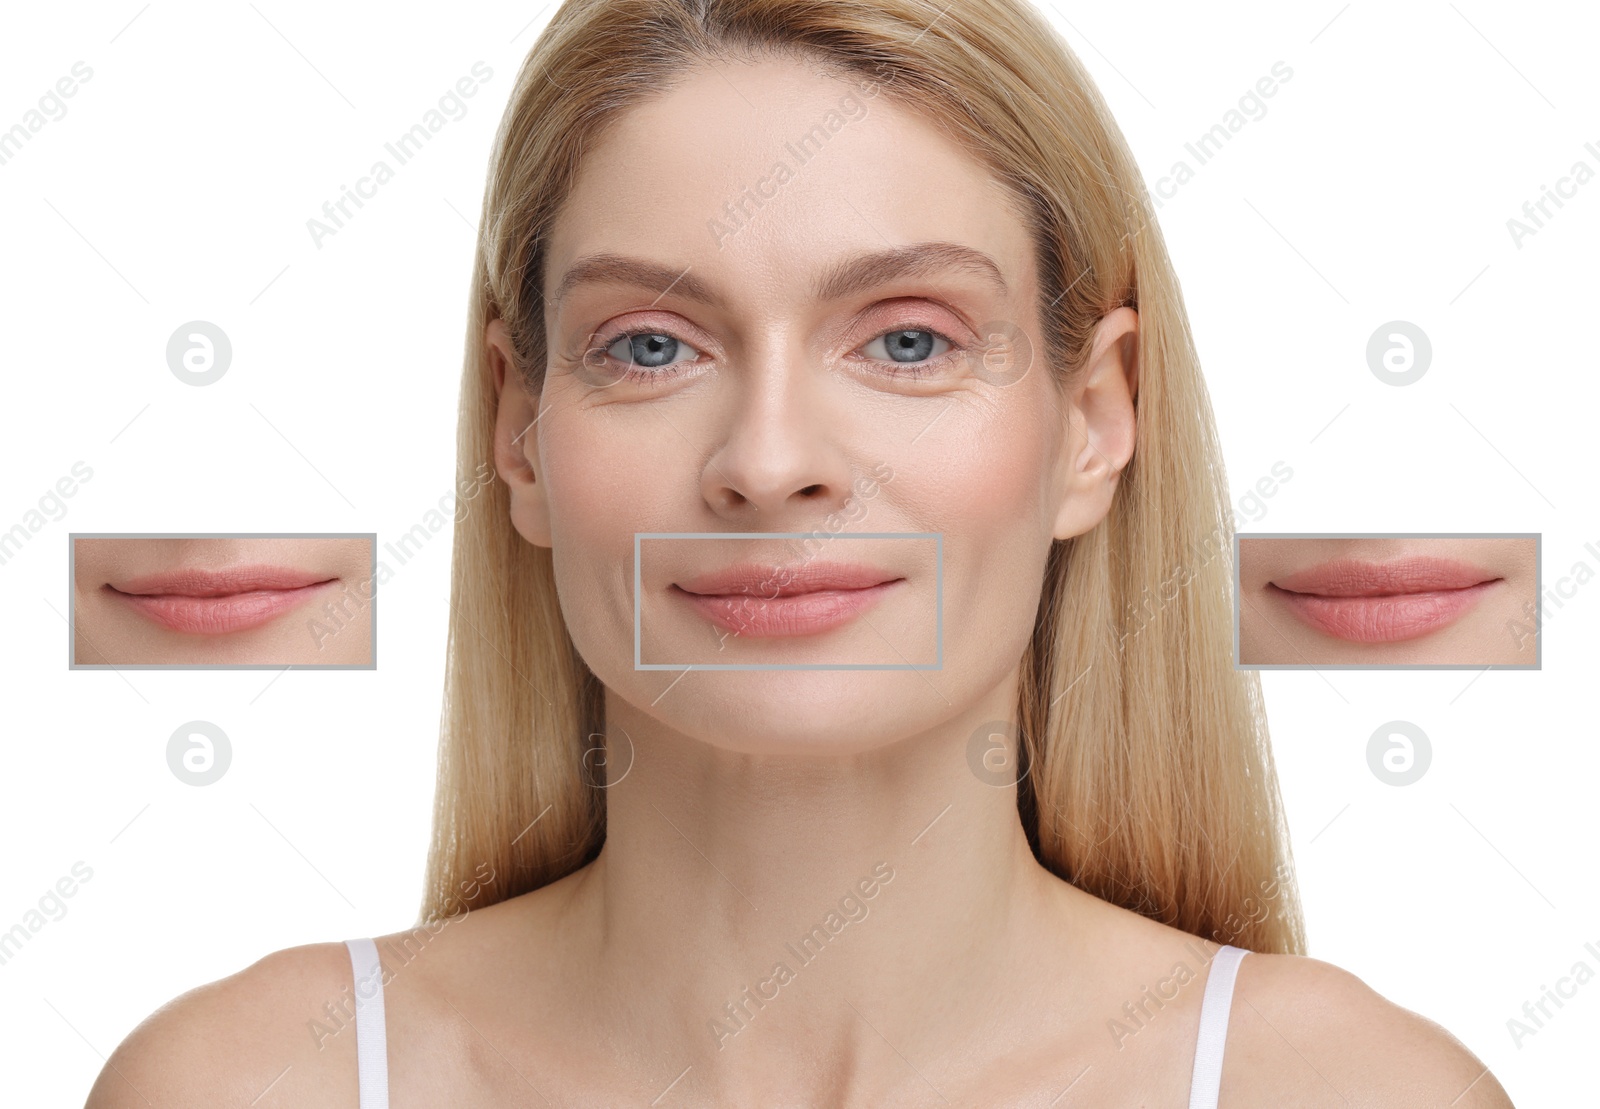 Image of Attractive woman with beautiful lips on white background. Zoomed areas showing difference in lip fullness due to cosmetic procedure